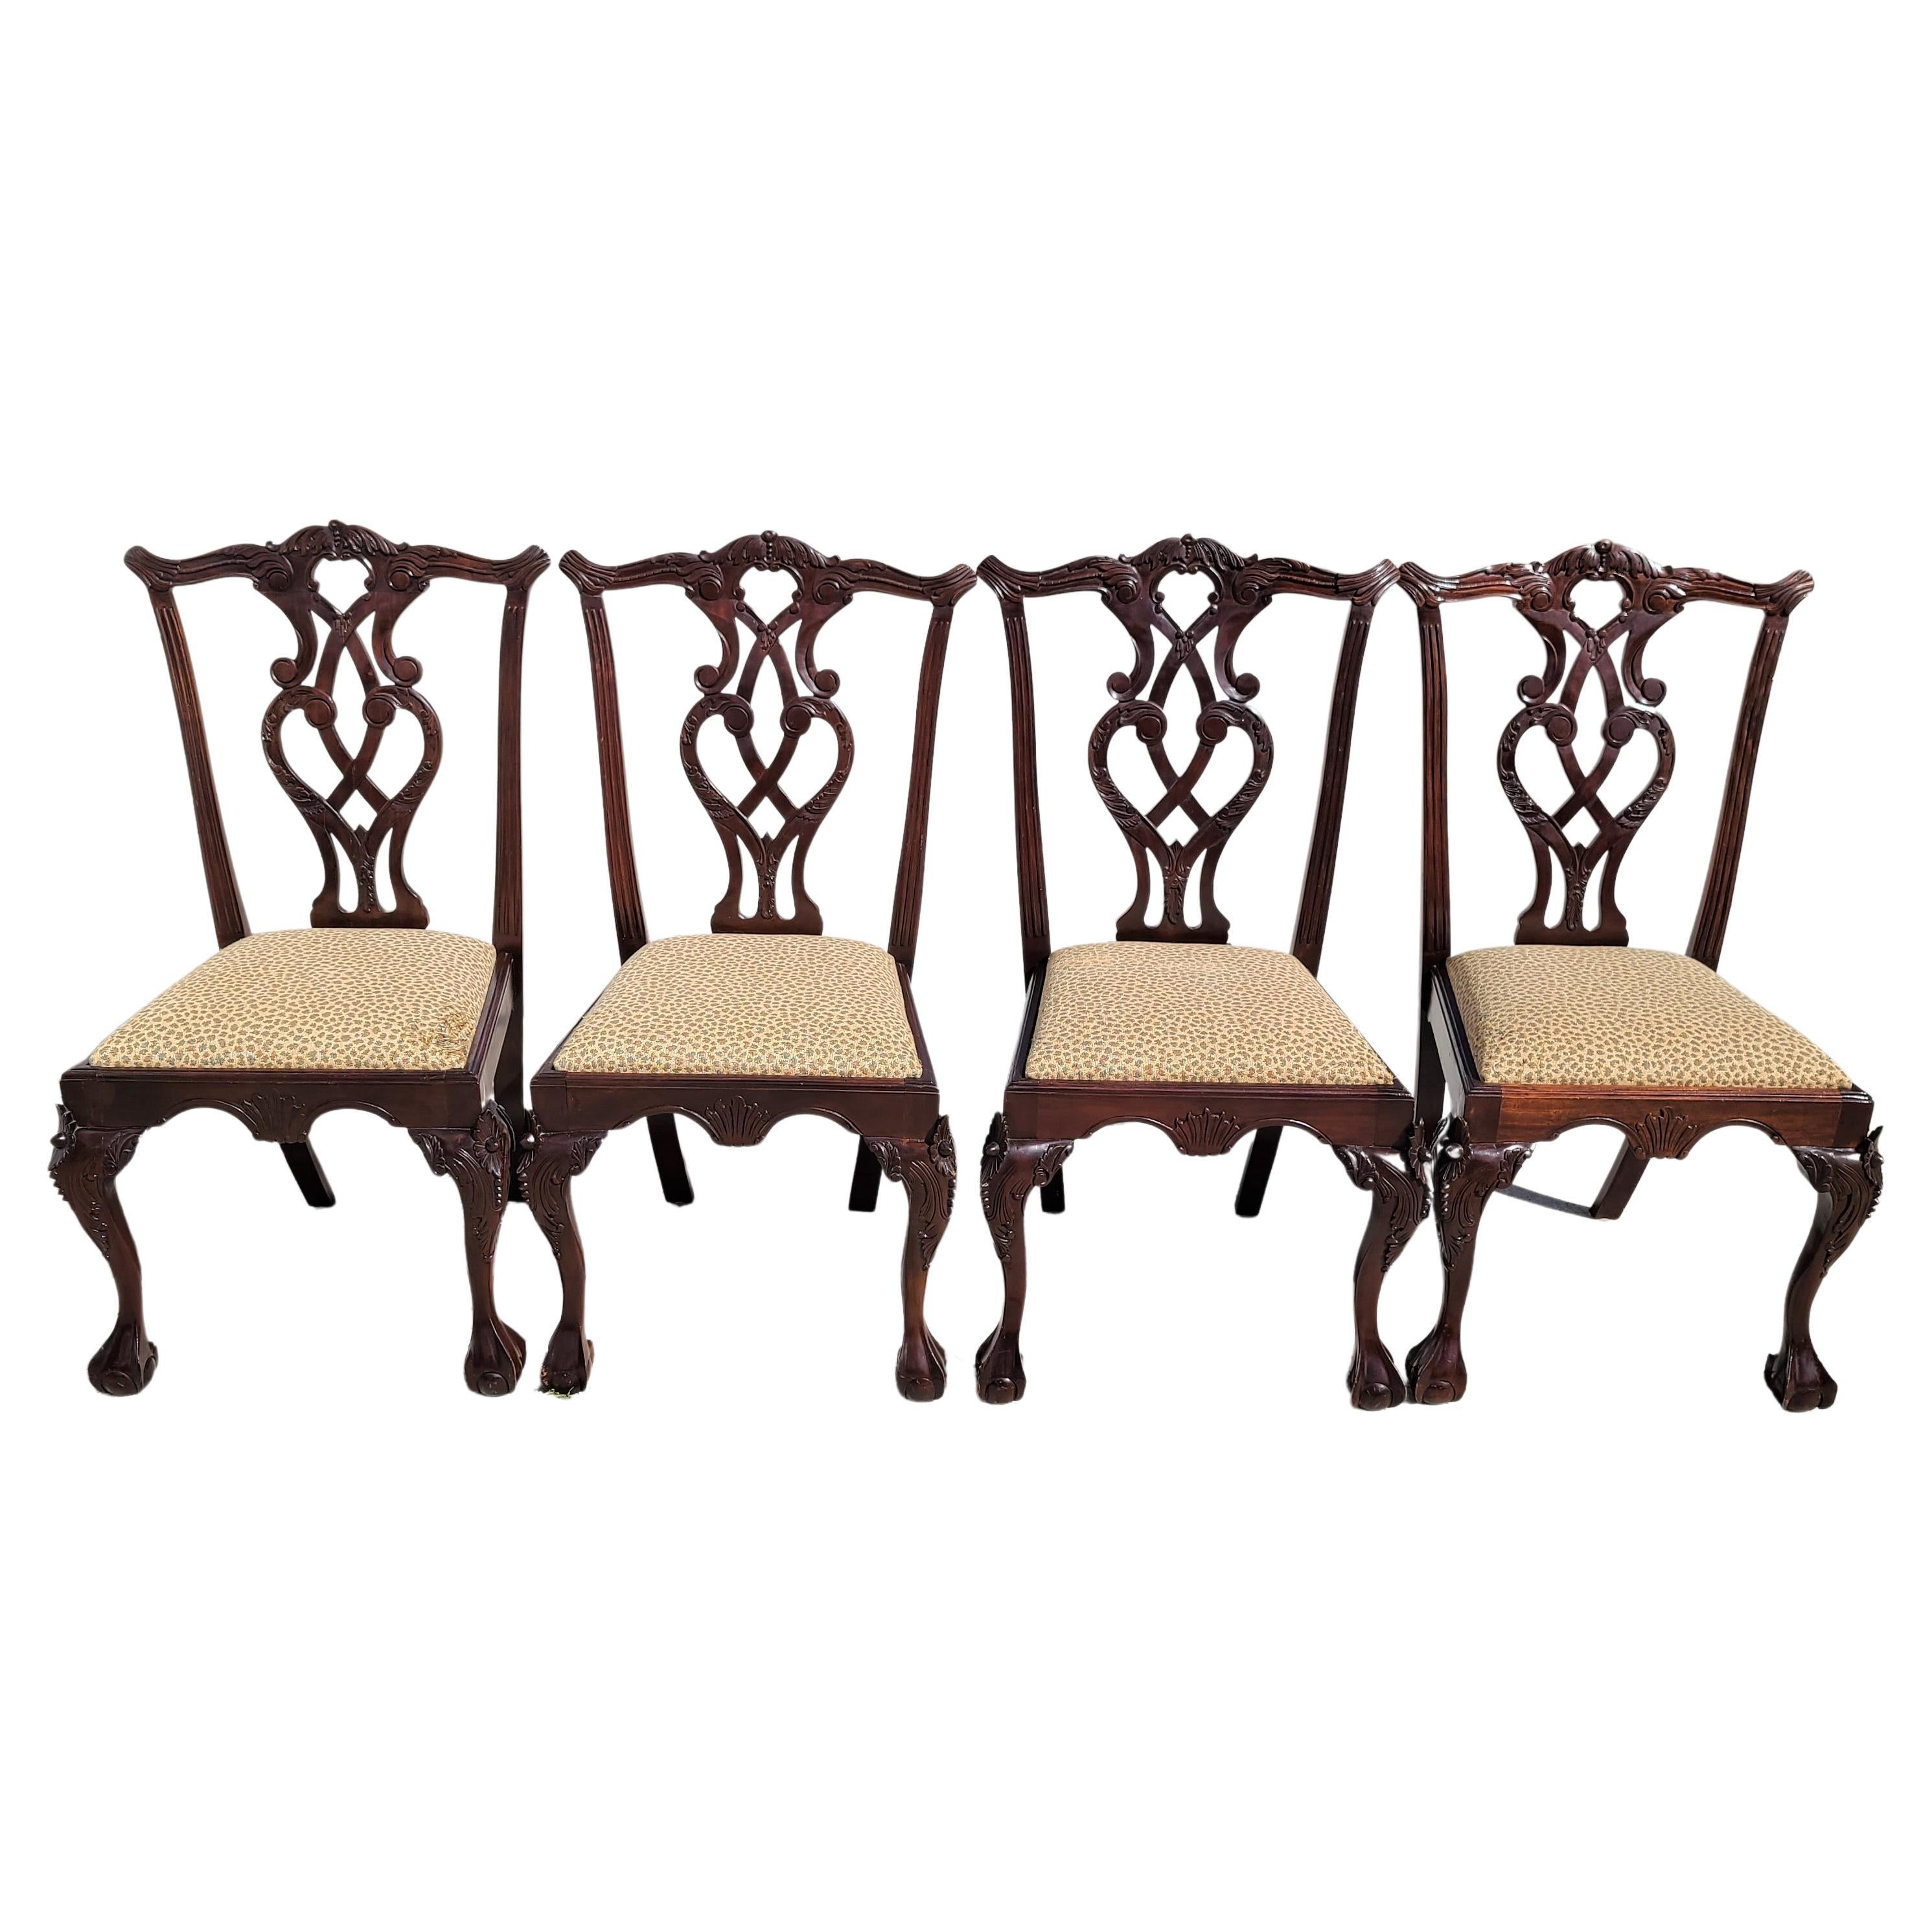 '4' Antique Chippendale Carved Mahogany Ball & Claw Dining Chairs